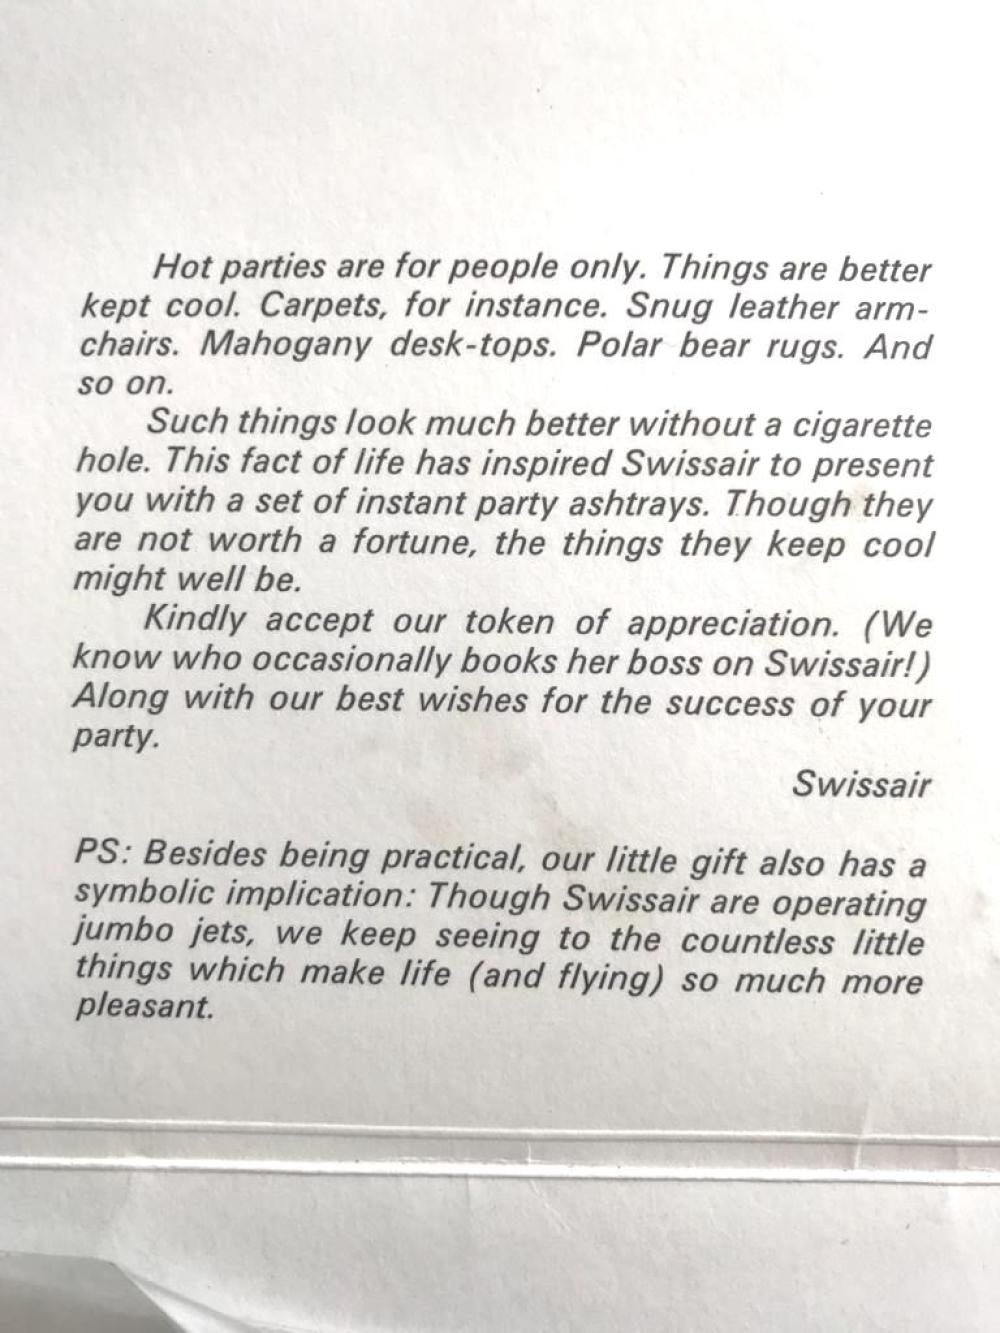 Swissair - The hole truth about hot parties